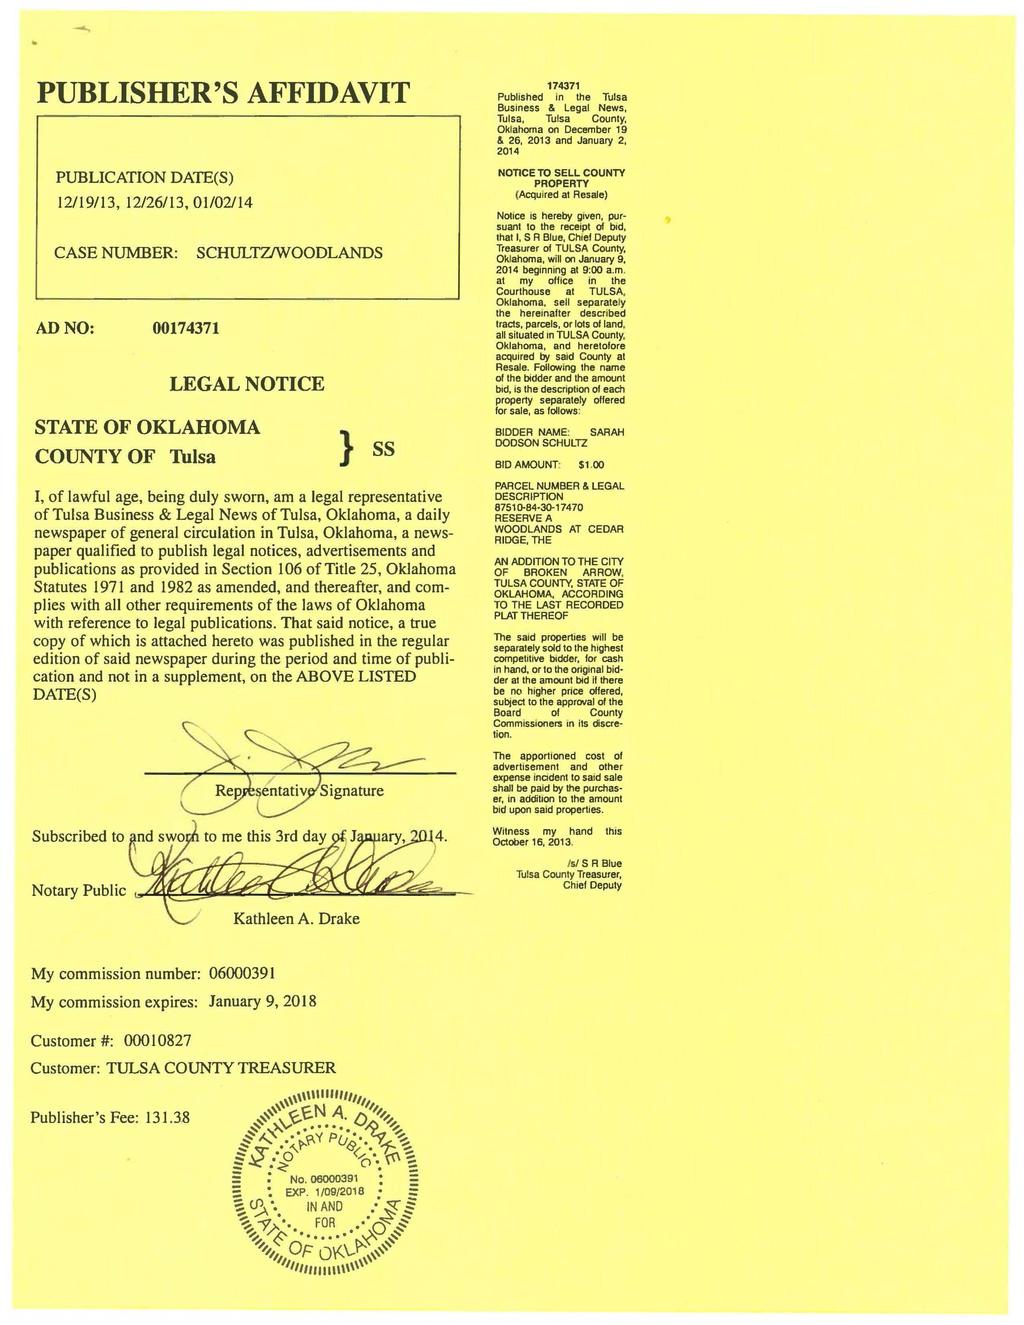 PUBLISHER'S AFFIDAVIT PUBLICATION DATE(S) 12/19/13, 12/26/13, 1/2/14 CASENUMBER: ADNO: 174371 SCHULTZ/WOODLANDS LEGAL NOTICE STATE OF OKLAHOMA COUNTY OF Tulsa } SS I, of lawful age, being duly sworn,